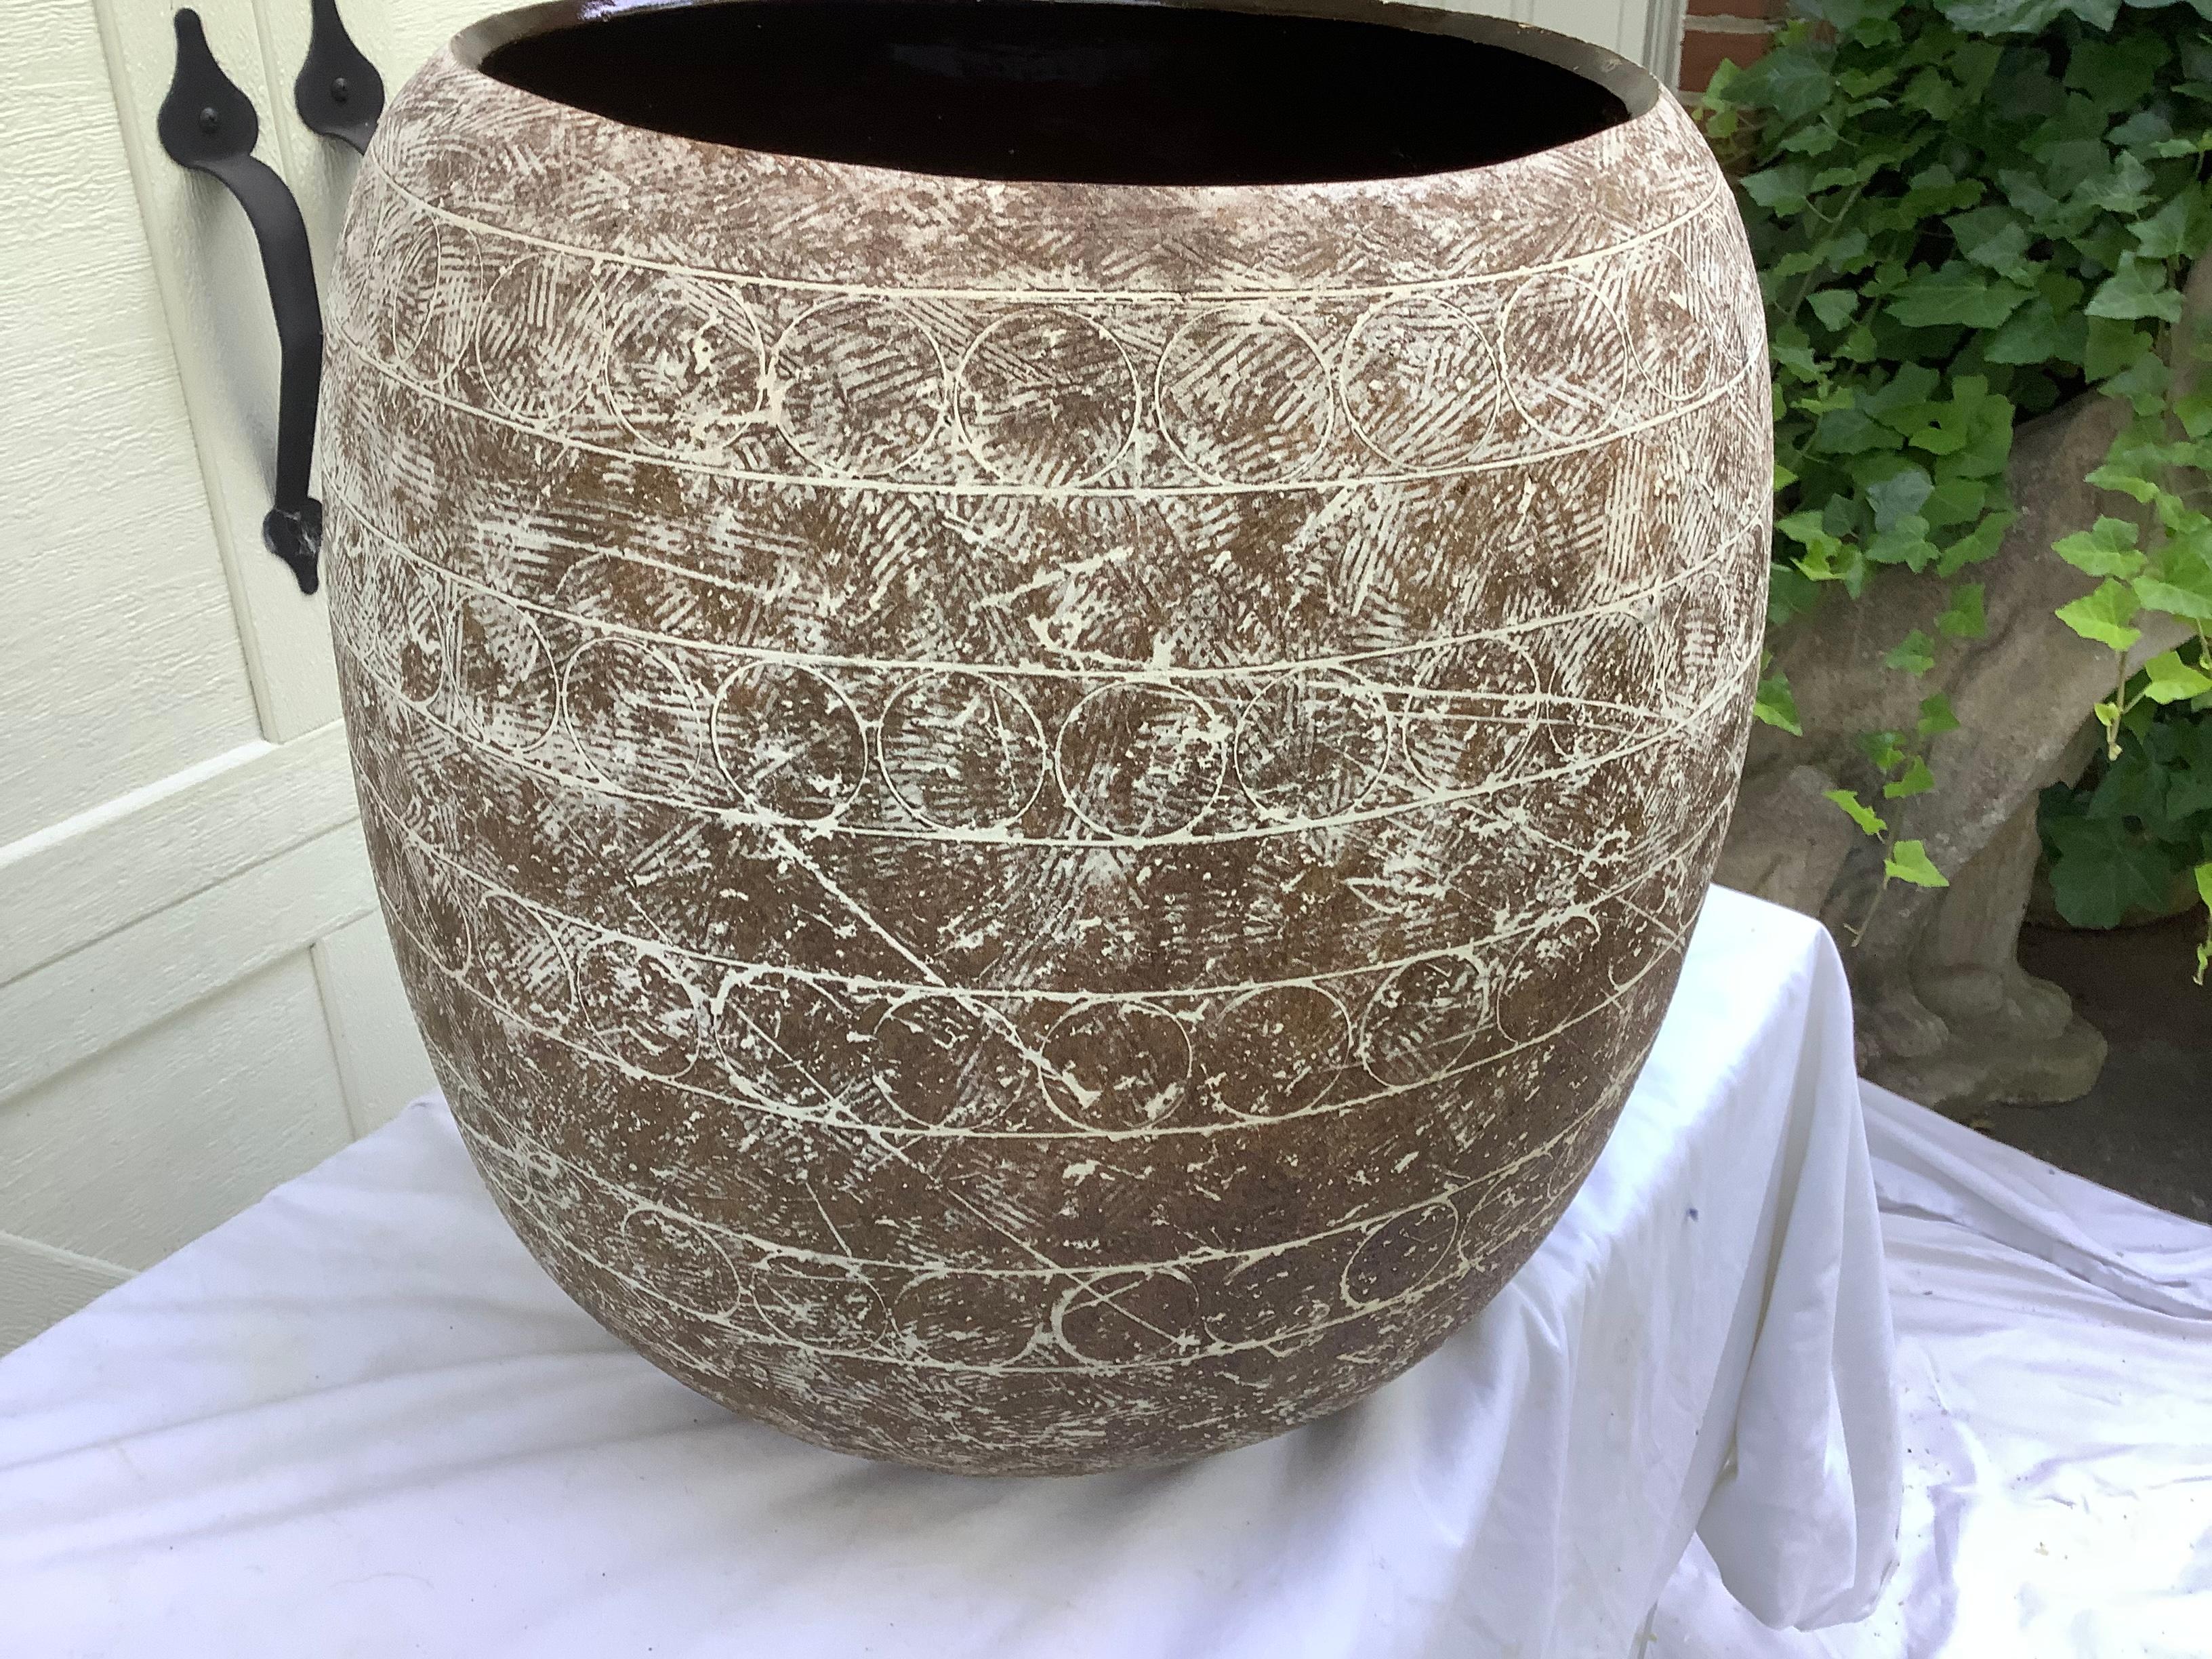 Striking piece of Midcentury modern pottery, by Claude Conover. Harder to find floor pot, signed / named Maach. #521. Large size, W 12.5” D opening. This piece was sold here in Atlanta, at the Signature Gallery( one of Conover’s principal outlets)